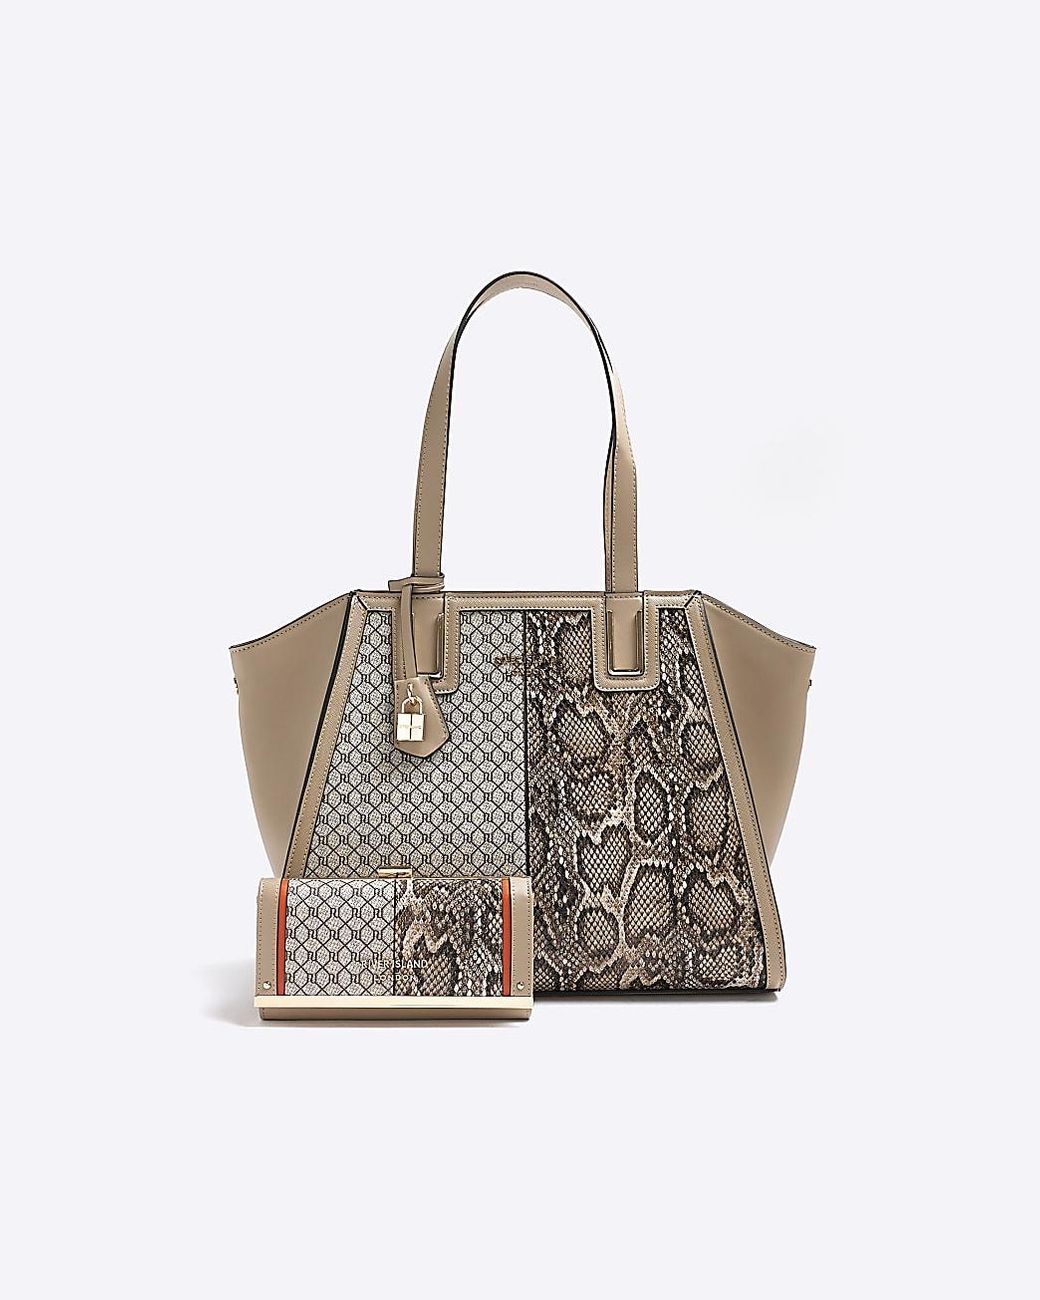 River Island Animal Print Tote Bag And Purse in Gray | Lyst